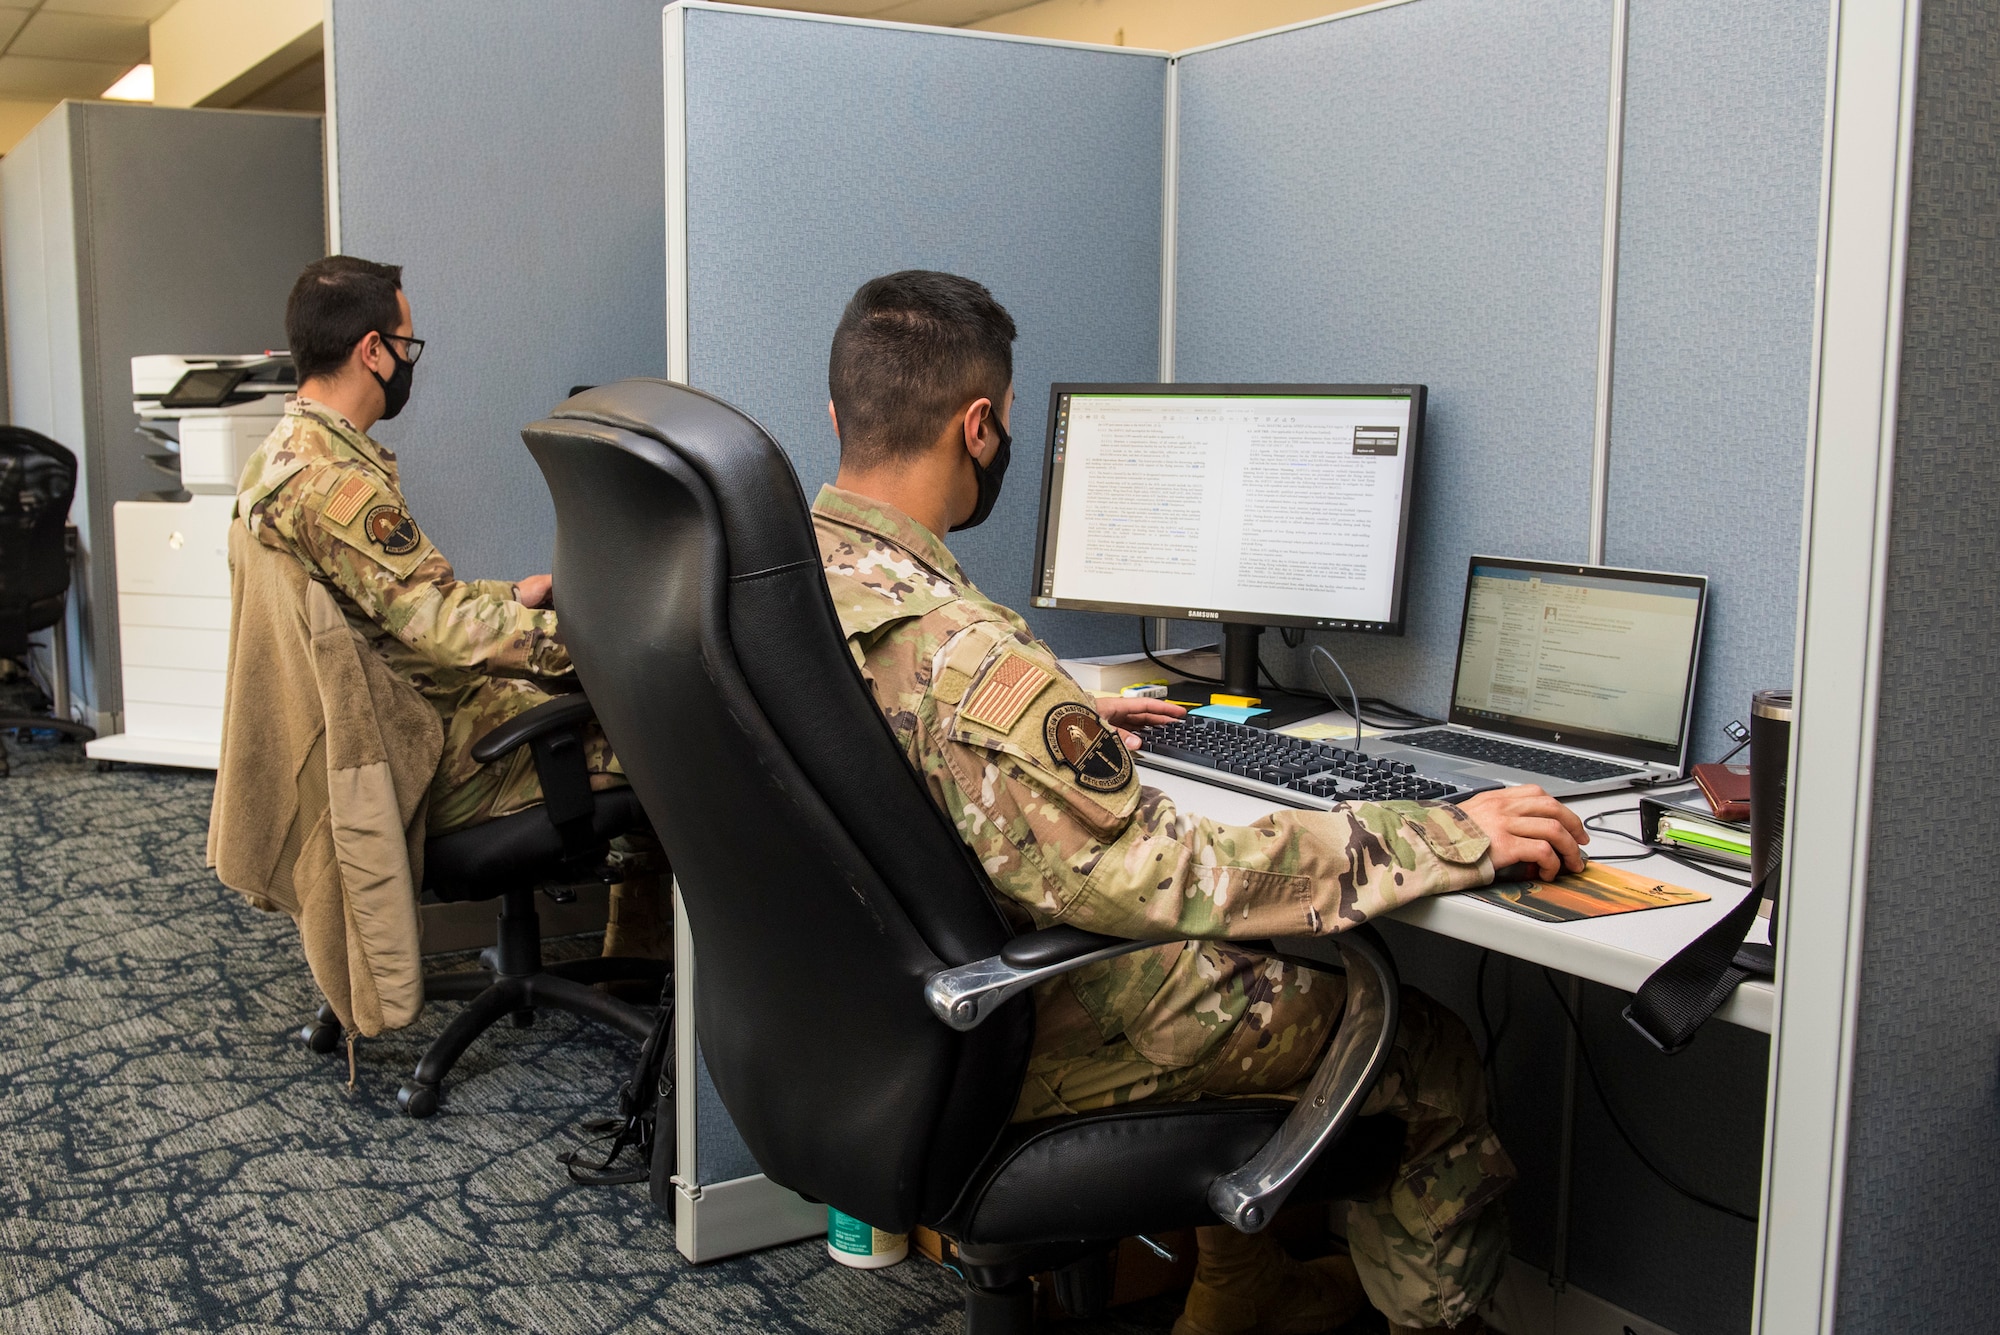 2nd Lt.’s Michael Ober, left, and Abhishek Strestha, right, study at workstations following the opening of the 13M Follow-On Skills Training facility at Wright-Patterson Air Force Base, Nov. 3, 2021. Wright-Patt’s 13M training facility is the first of four to open nationwide in an effort by the Air Force to standardize and accelerate the program. (U.S. Air Force photo by Jaima Fogg)